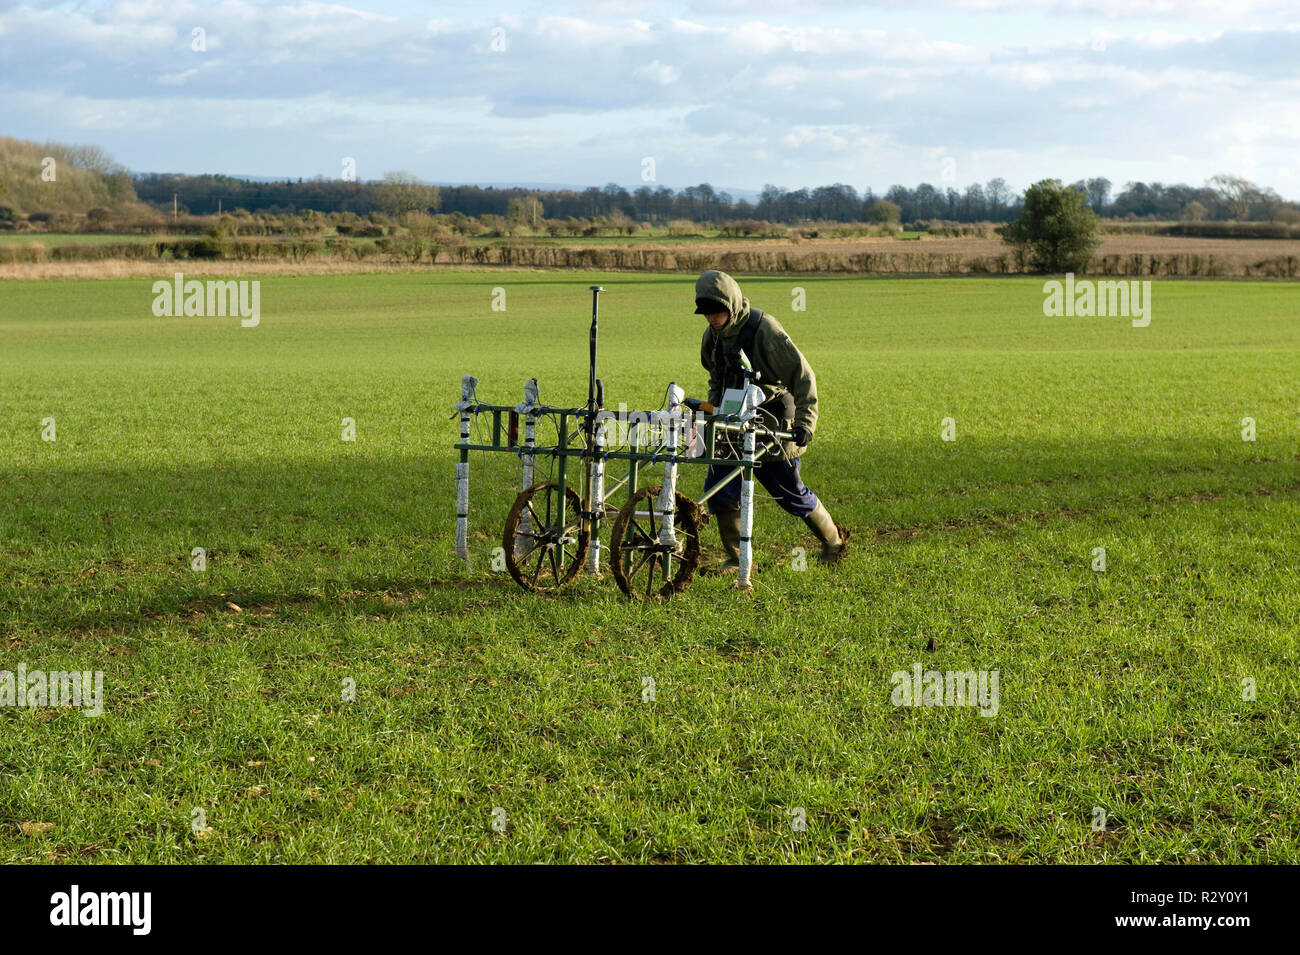 A geophysicist pushing a trolley with ground mapping sensors, creating a geophysical survey of the subsoil in a field. Stock Photo